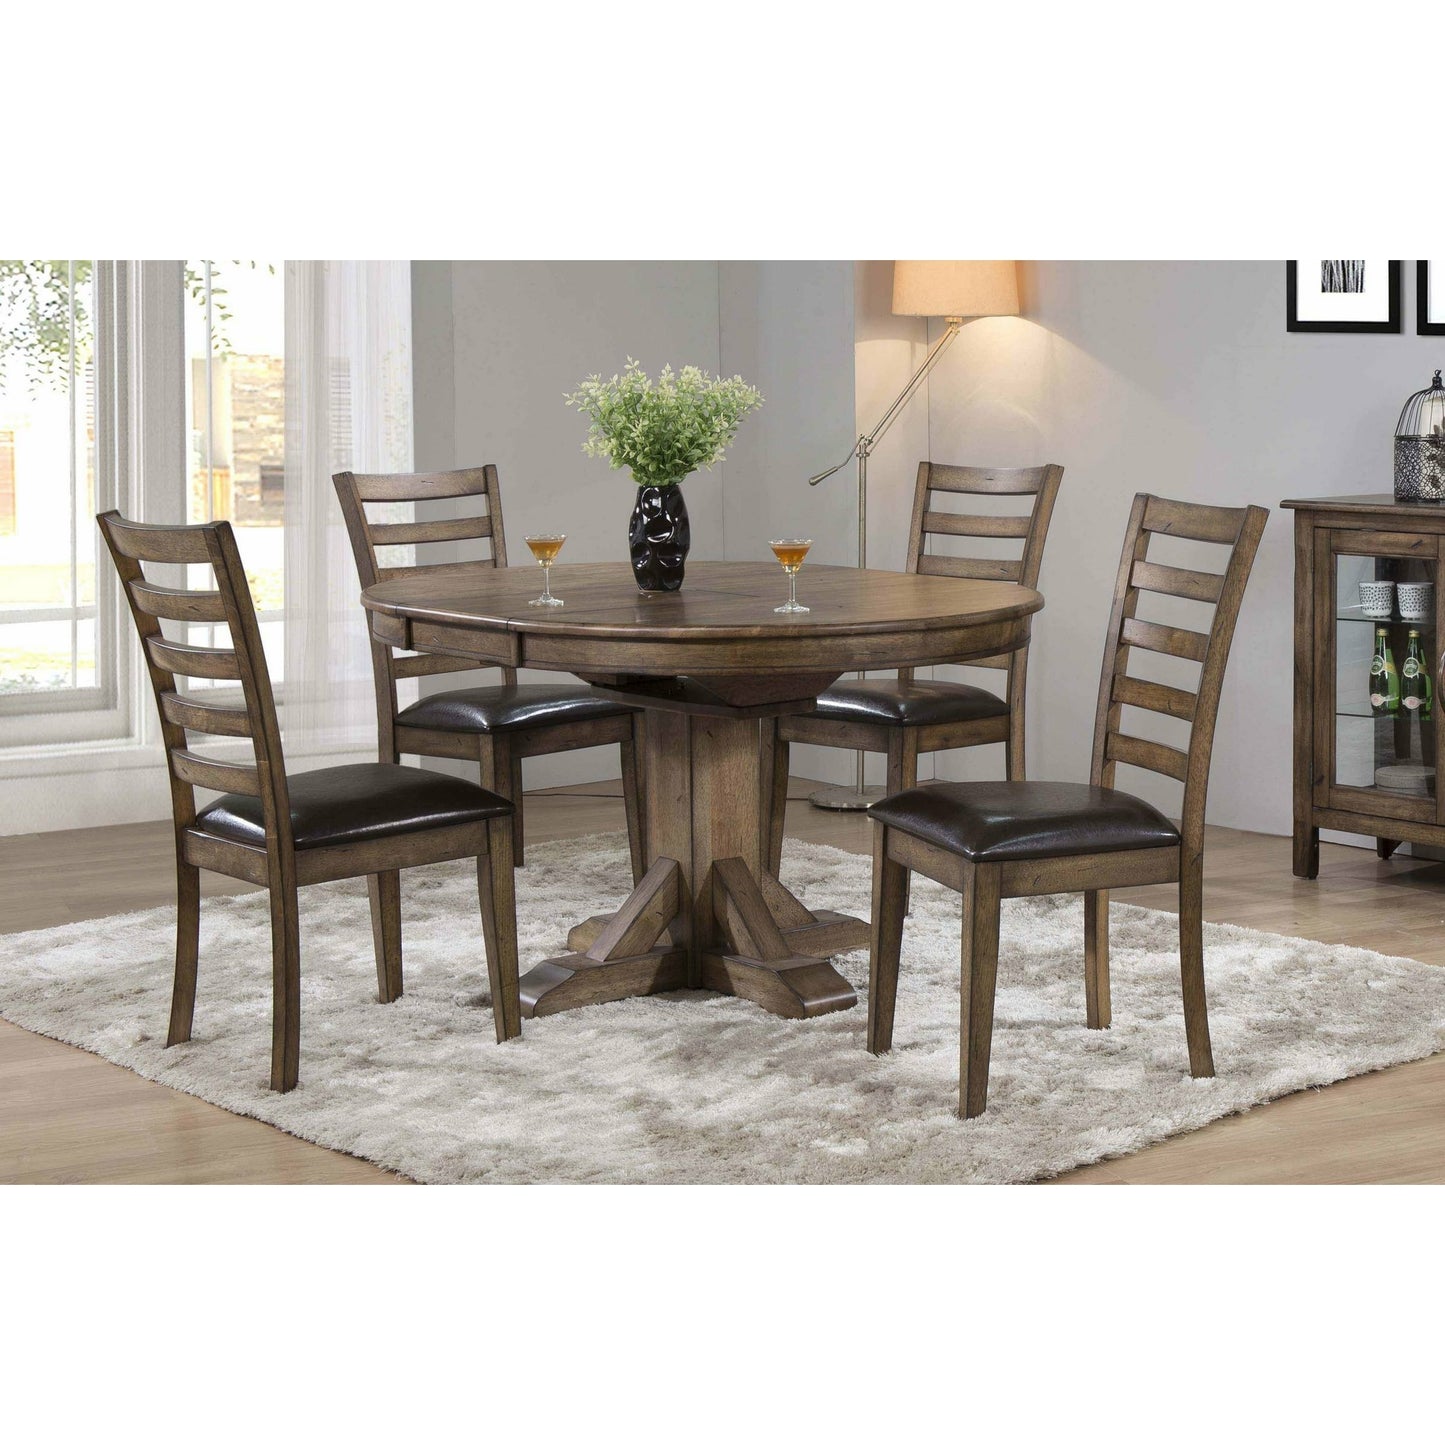 NEWPORT DINING SET (SMALL) - TABLE & 4 CHAIRS